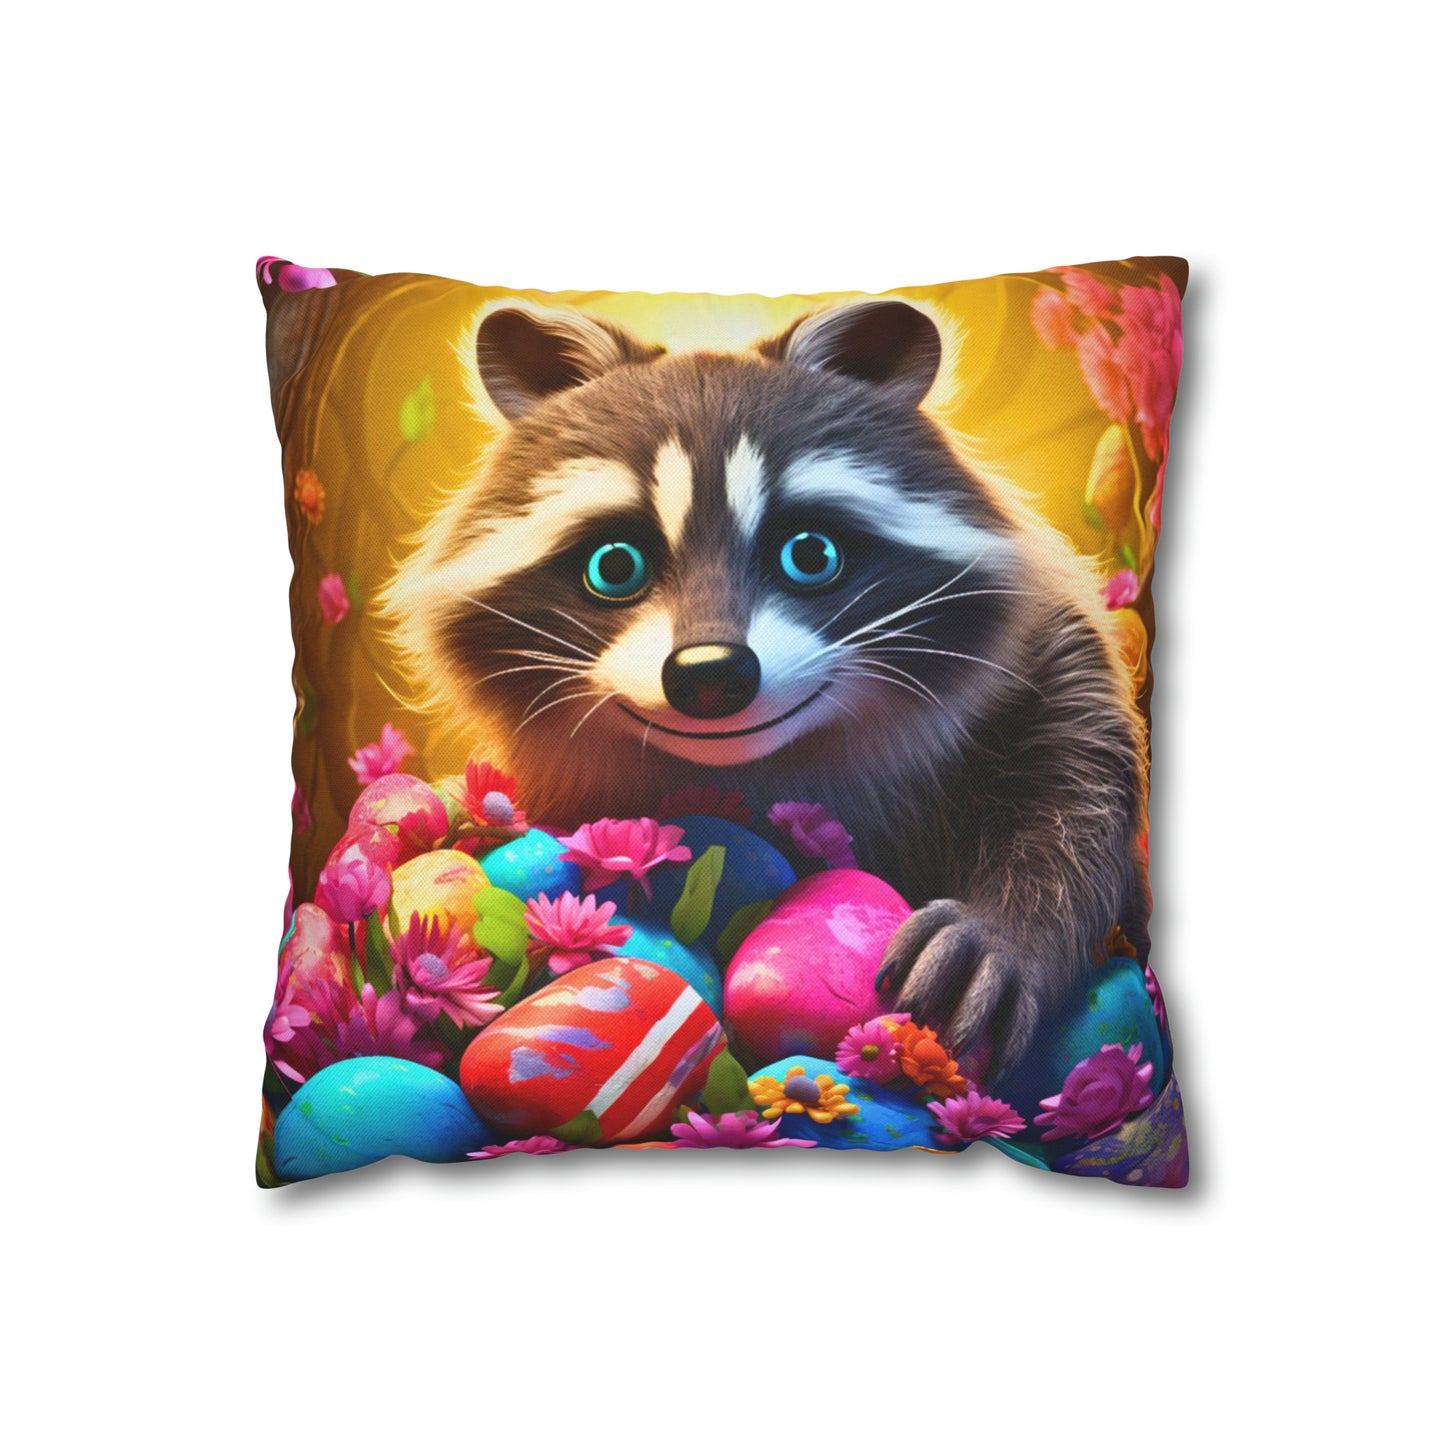 Square Pillow - The Raccoon Who Stole Easter